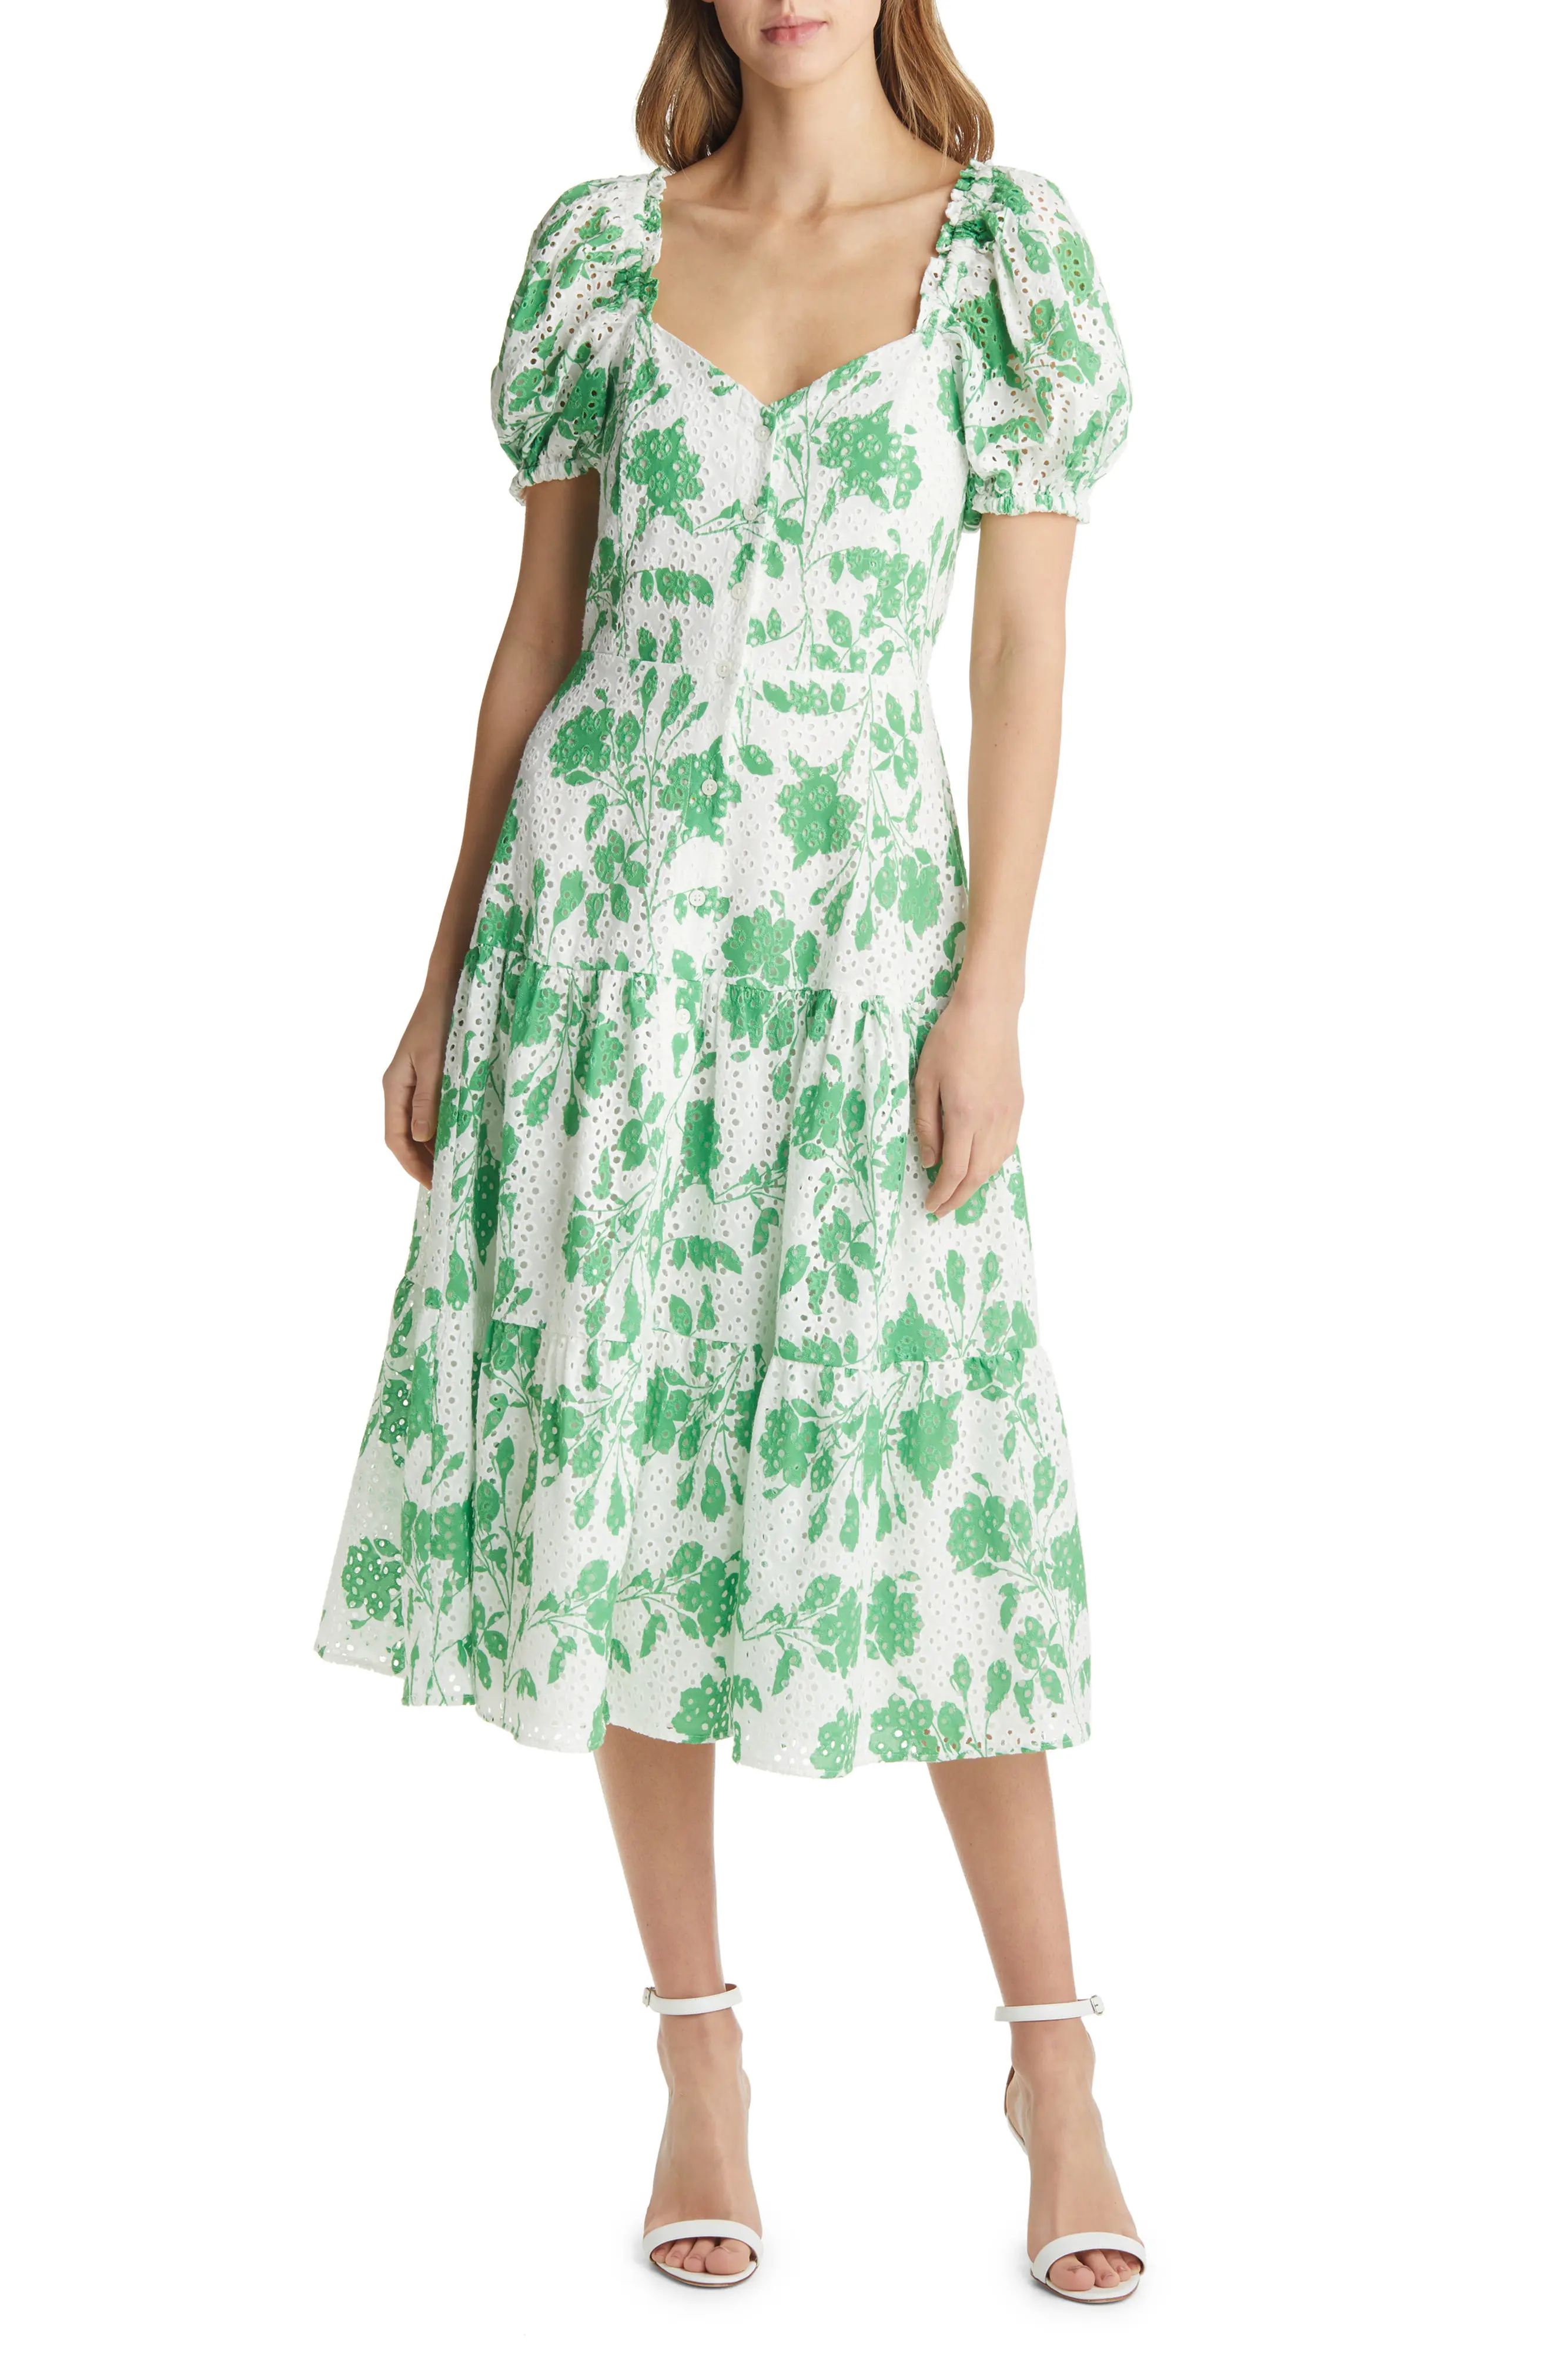 Rachel Parcell Floral Cotton Eyelet Midi Dress in Foliage/White at Nordstrom, Size Xx-Small | Nordstrom